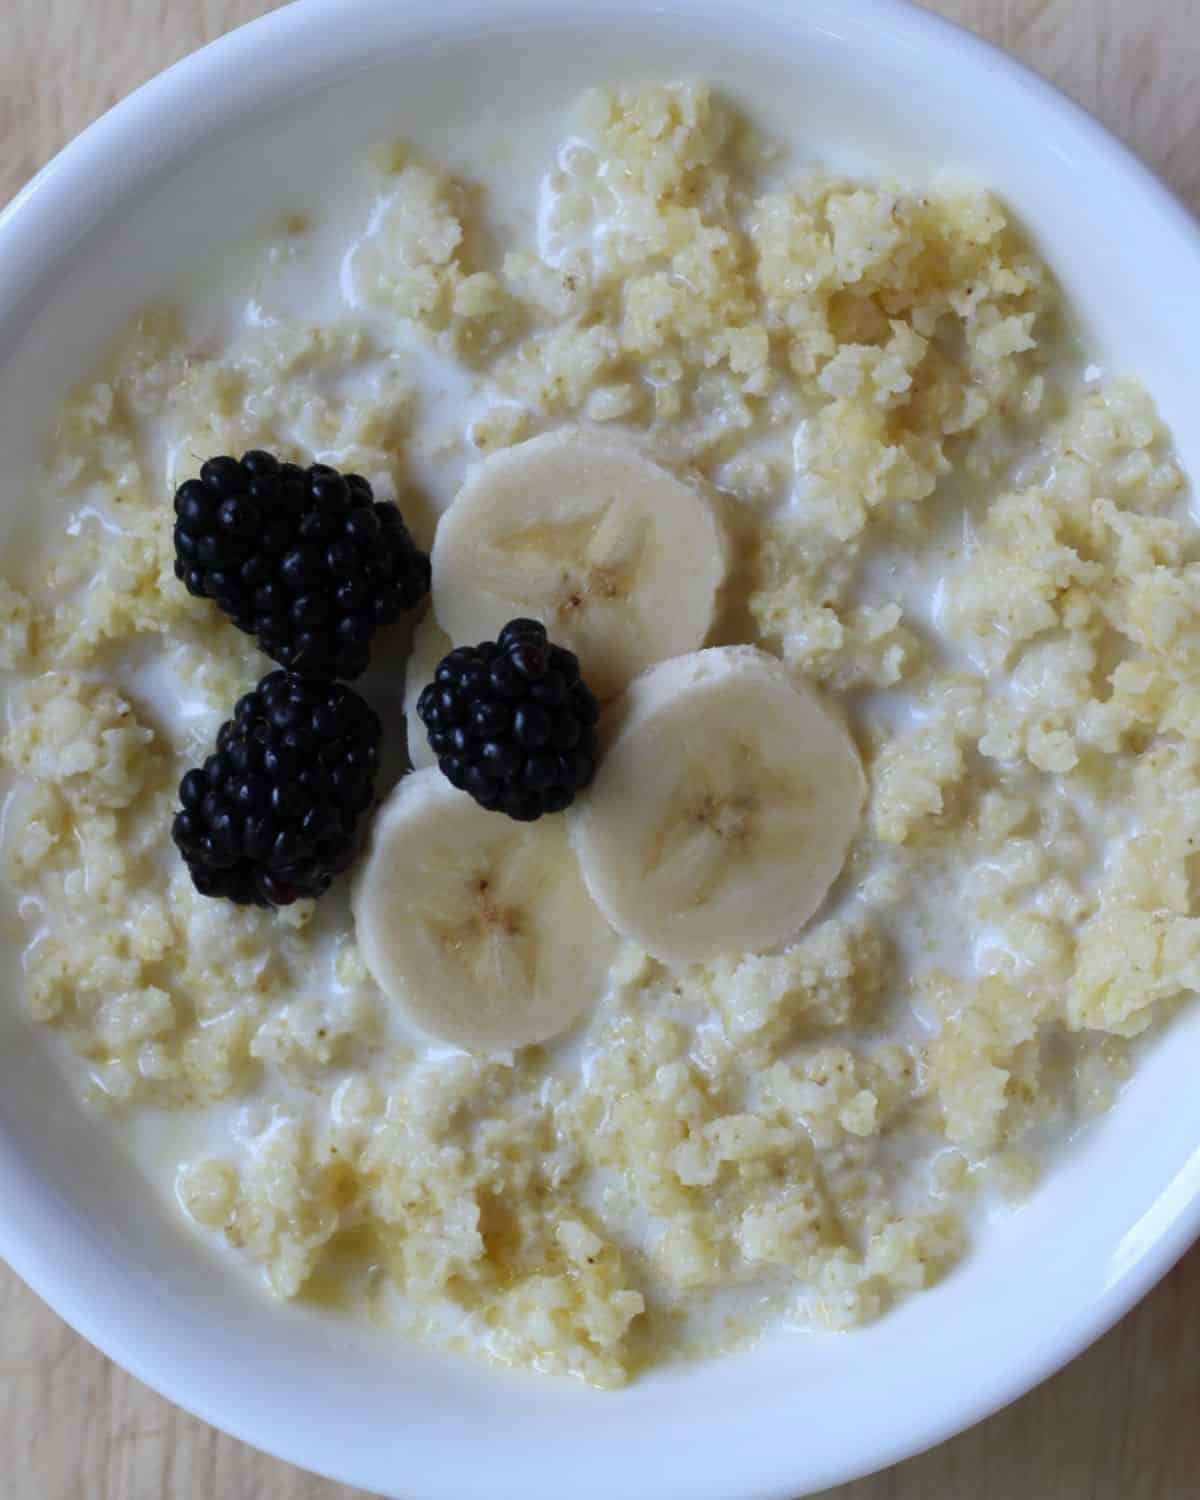 Yellow grain porridge with milk topped with slices bananas and fresh blackberries in a white bowl.